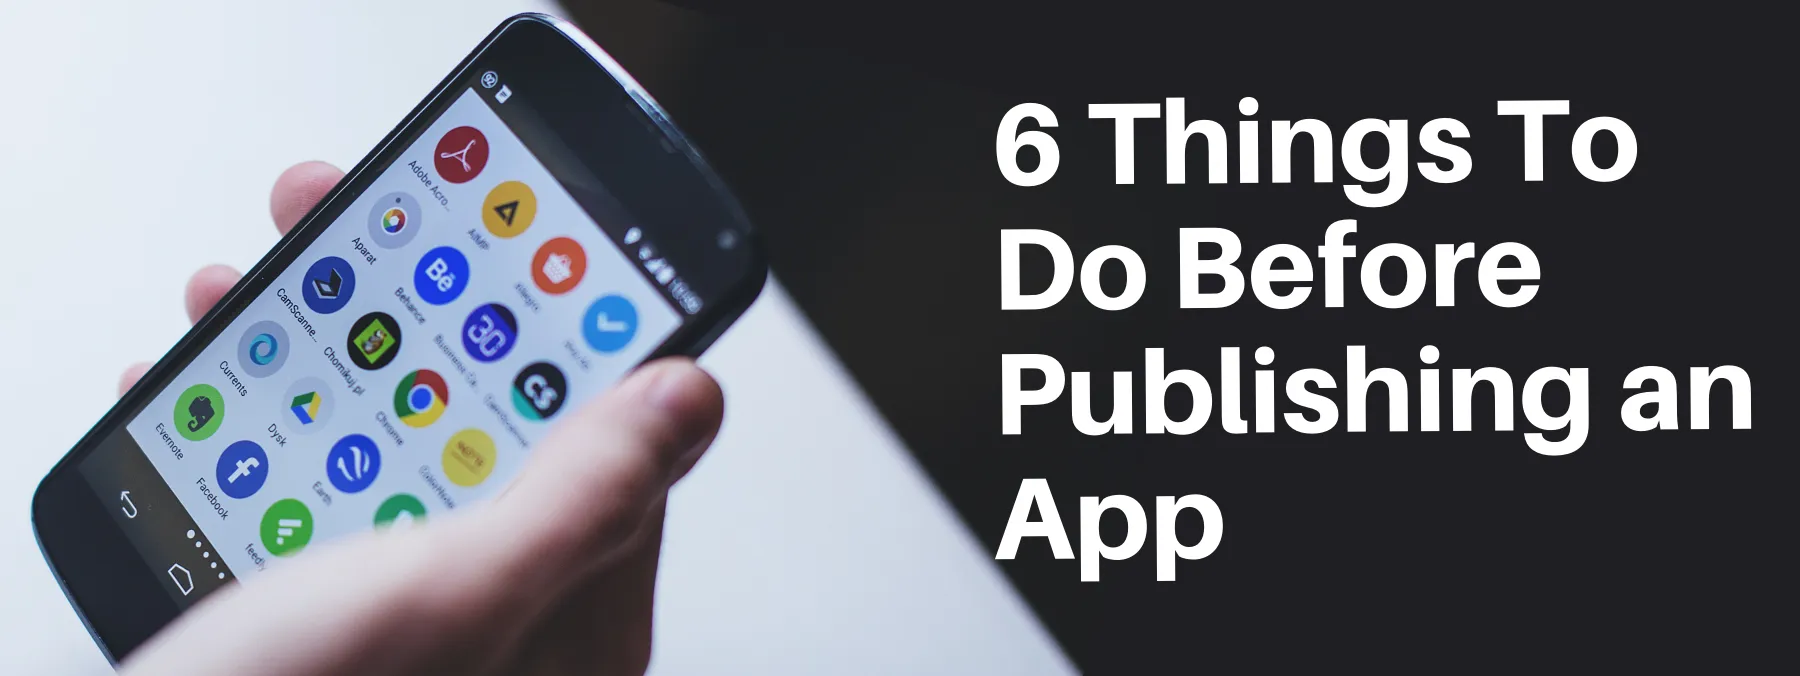 Go Live: 6 Things To Do Before Publishing an App